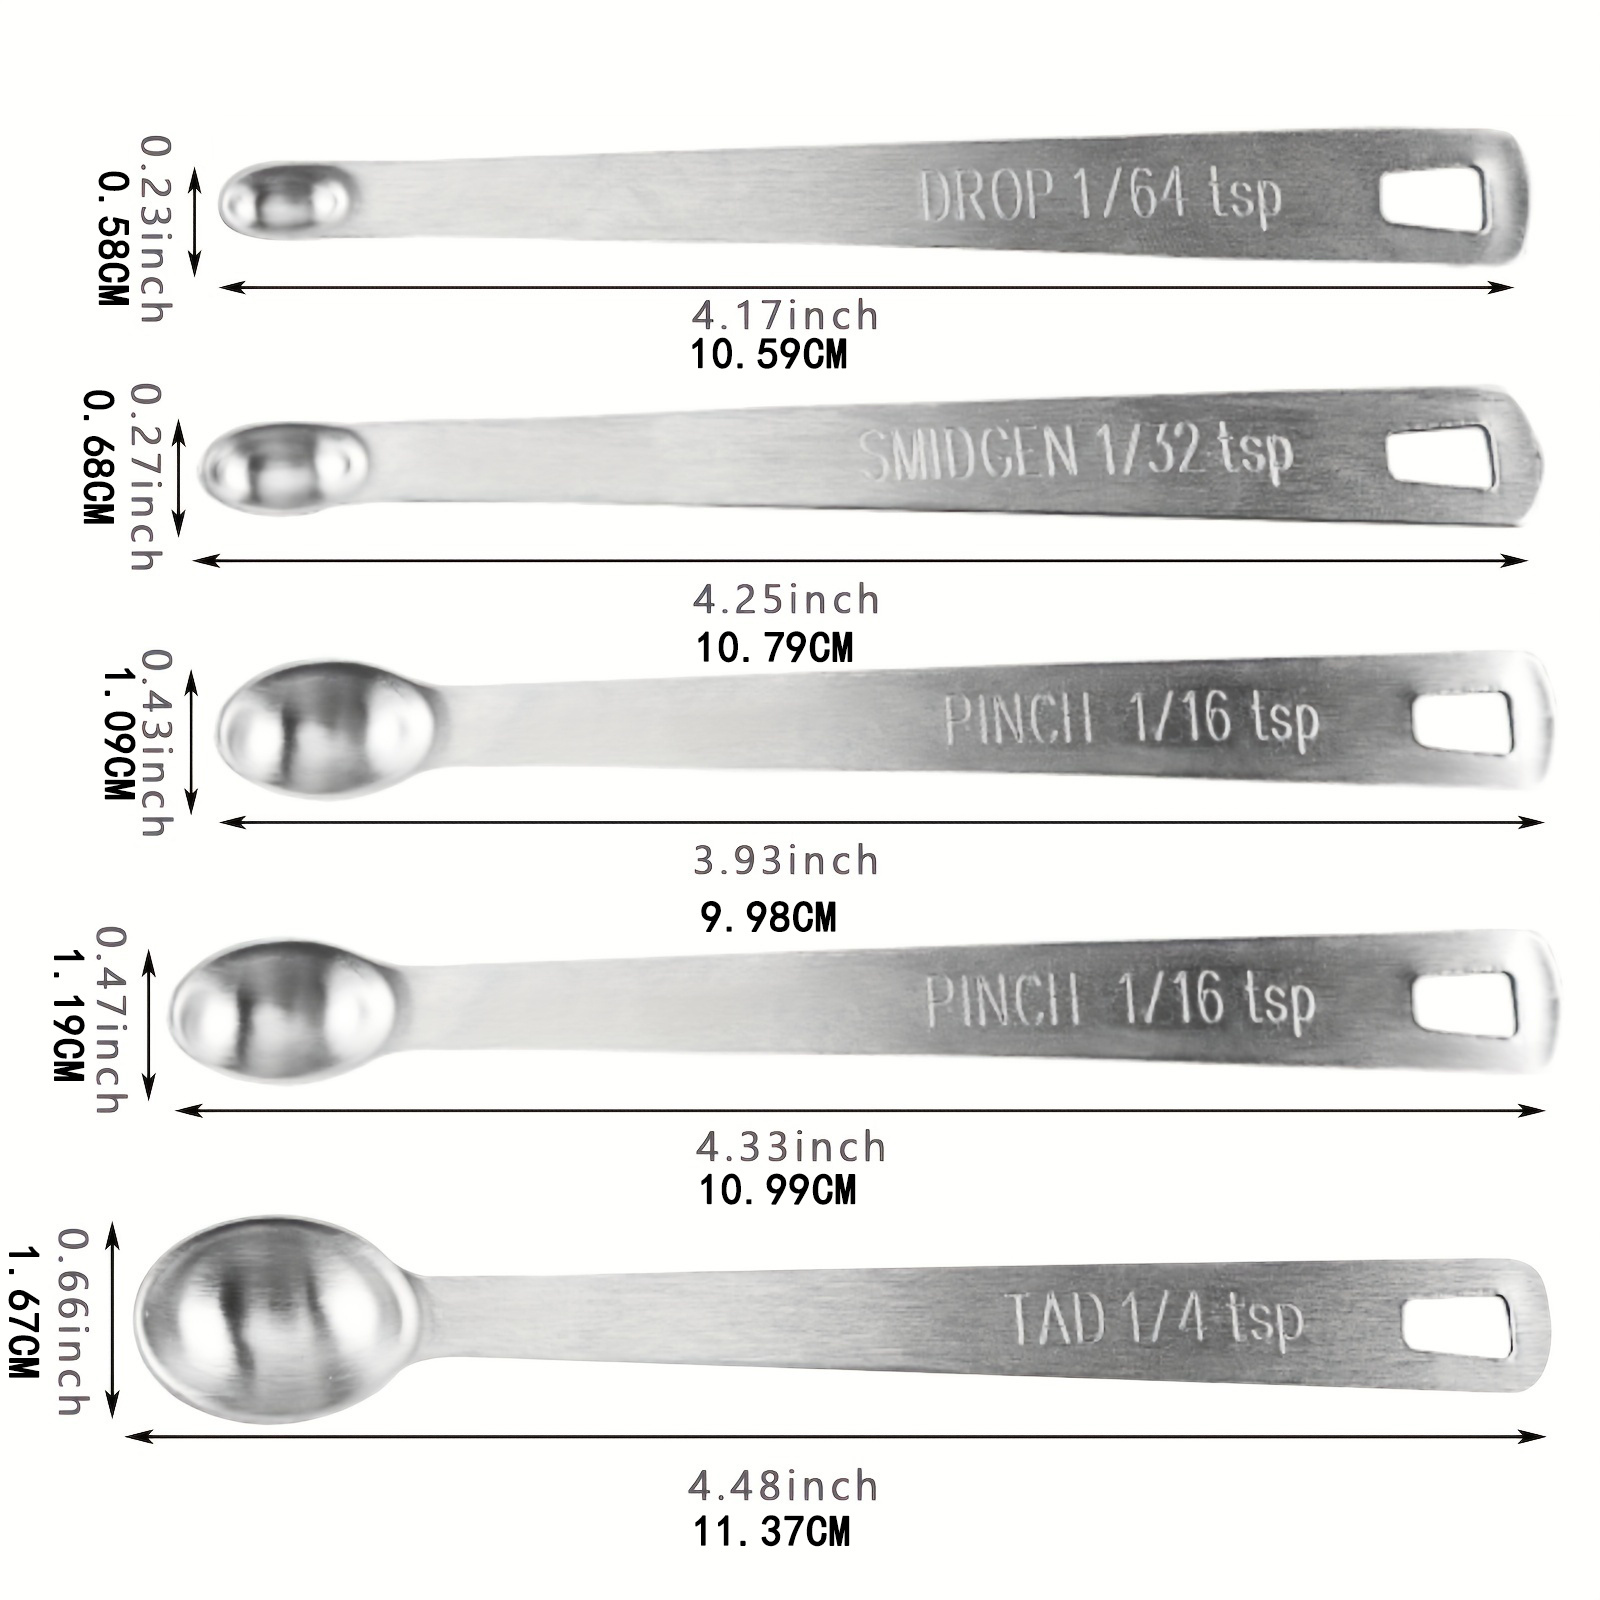 Stainless Steel Mini Measuring Spoons Set - 5 Spoons Included - 1